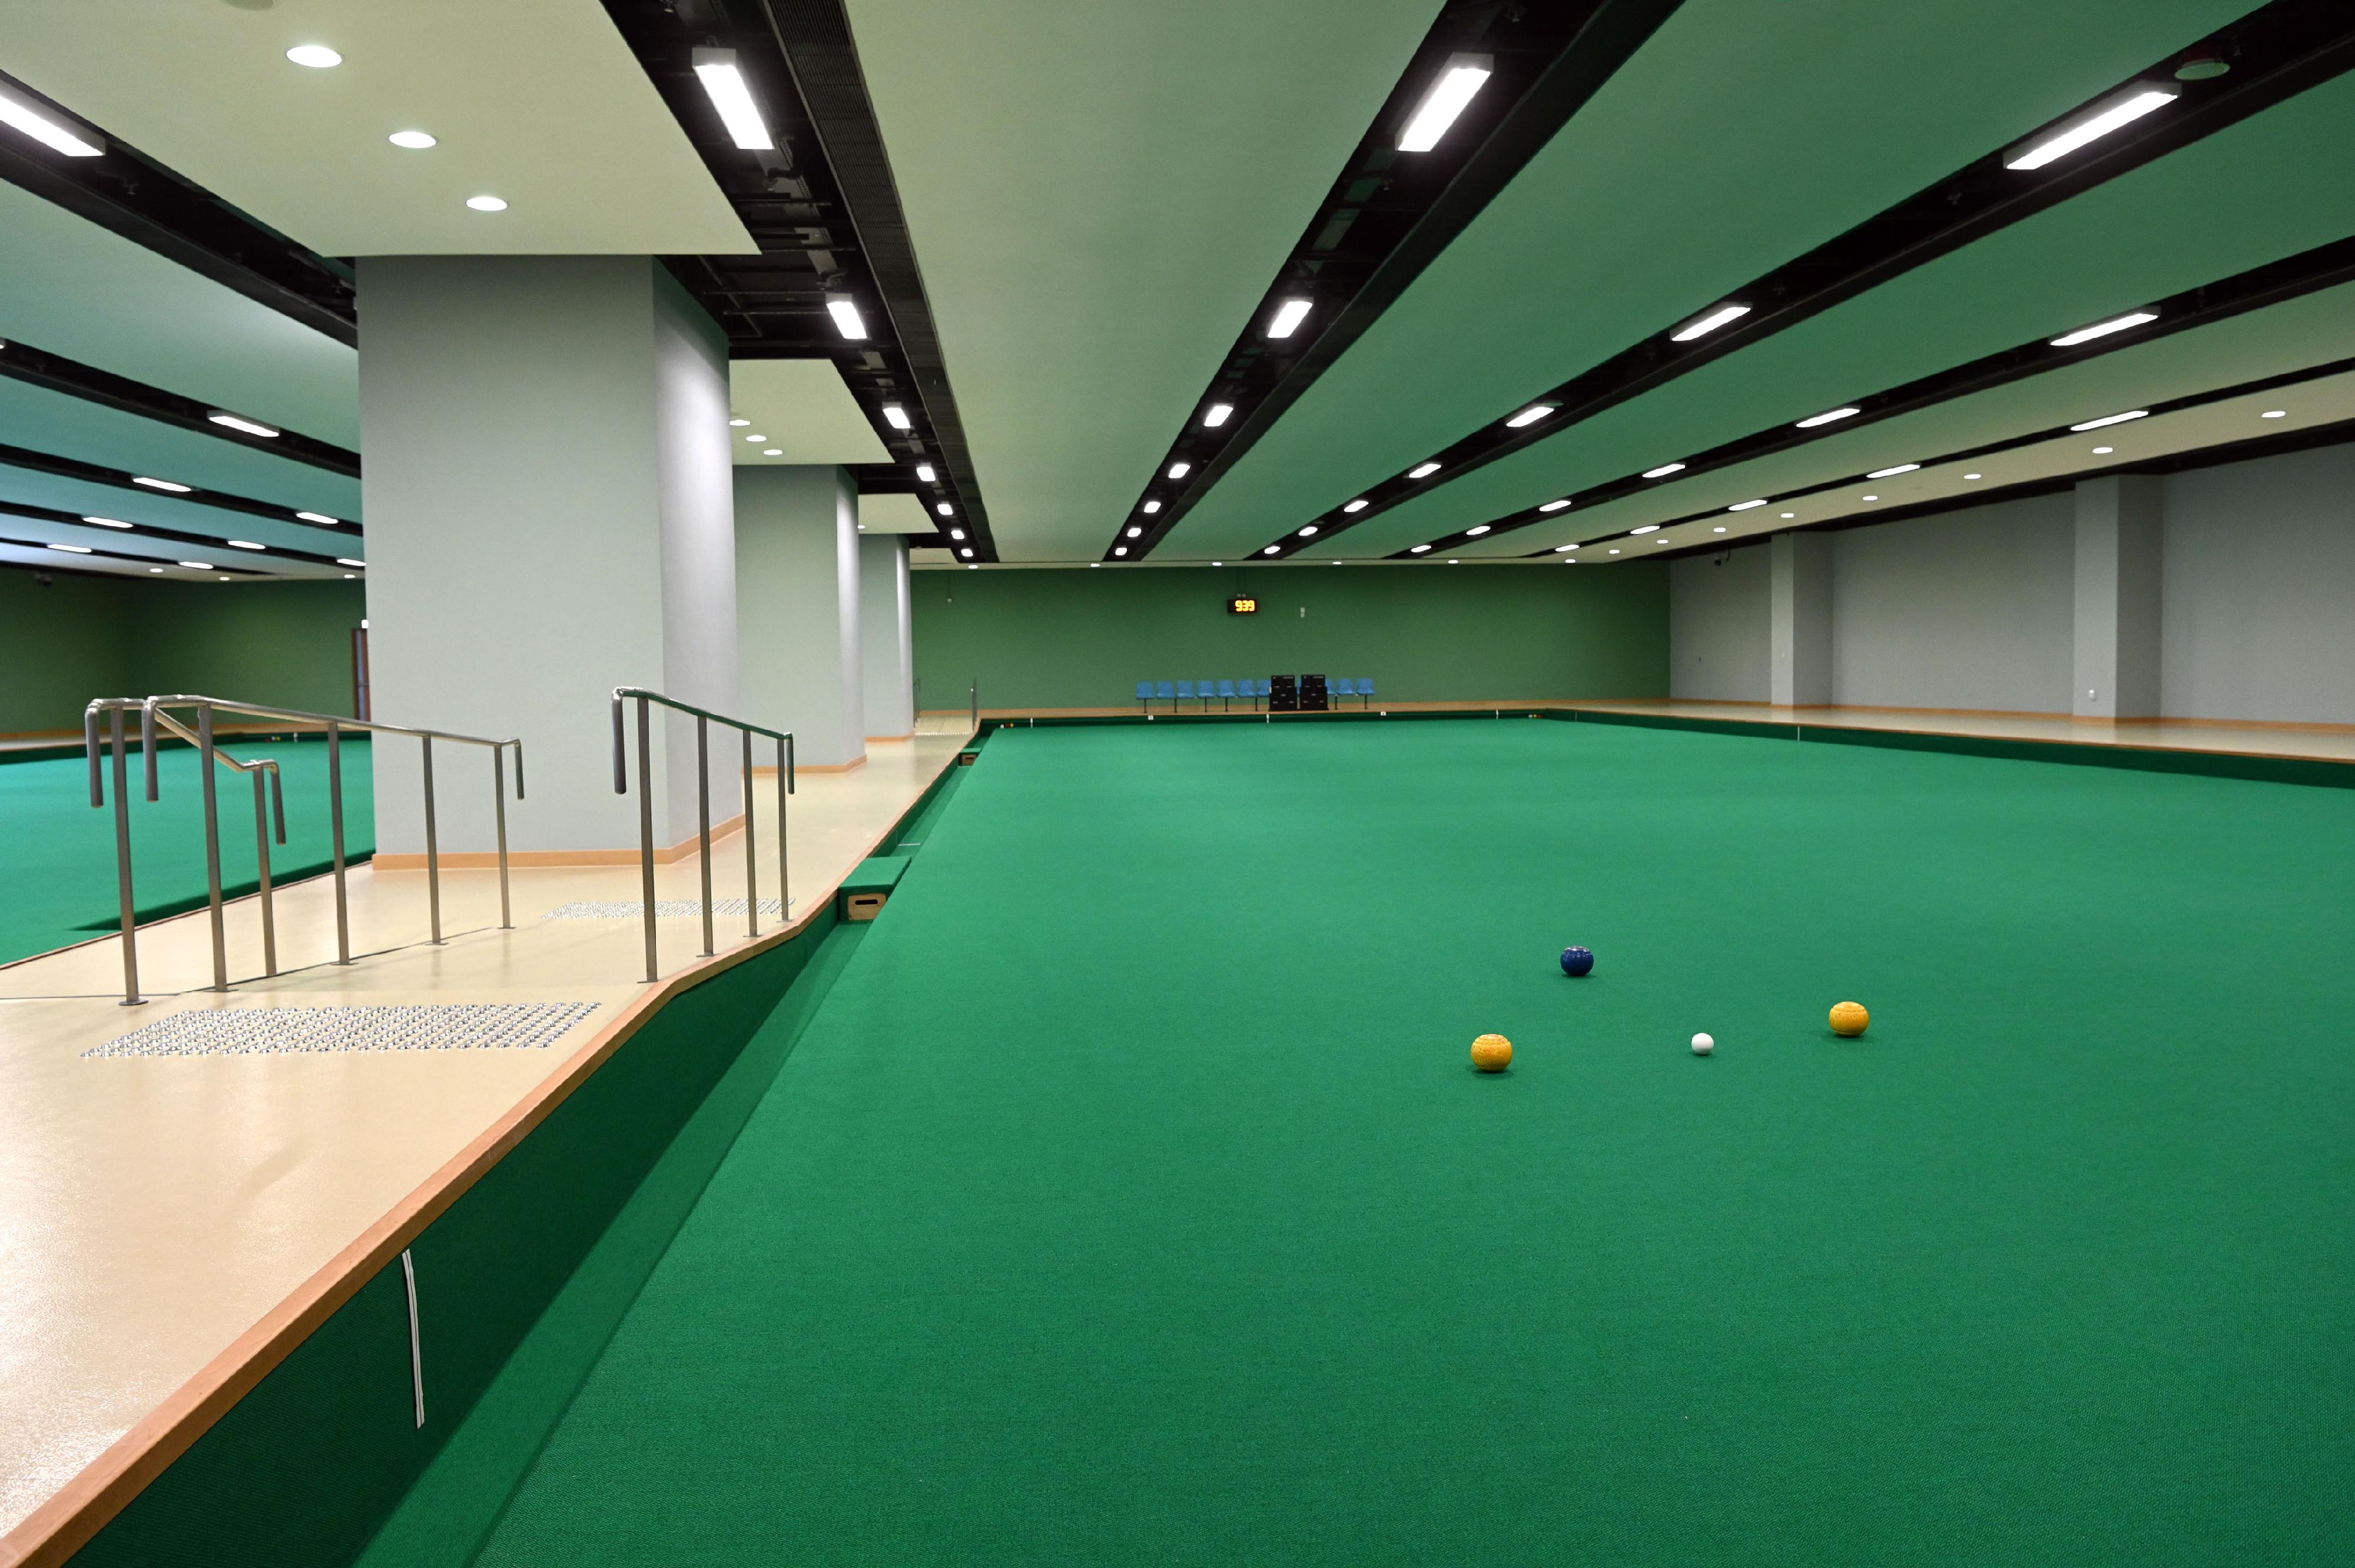 The newly built Tung Cheong Street Sports Centre, managed by the Leisure and Cultural Services Department, will open for public use on August 15 (Monday), providing a wide range of leisure and sports facilities. Photo shows the indoor bowling green.